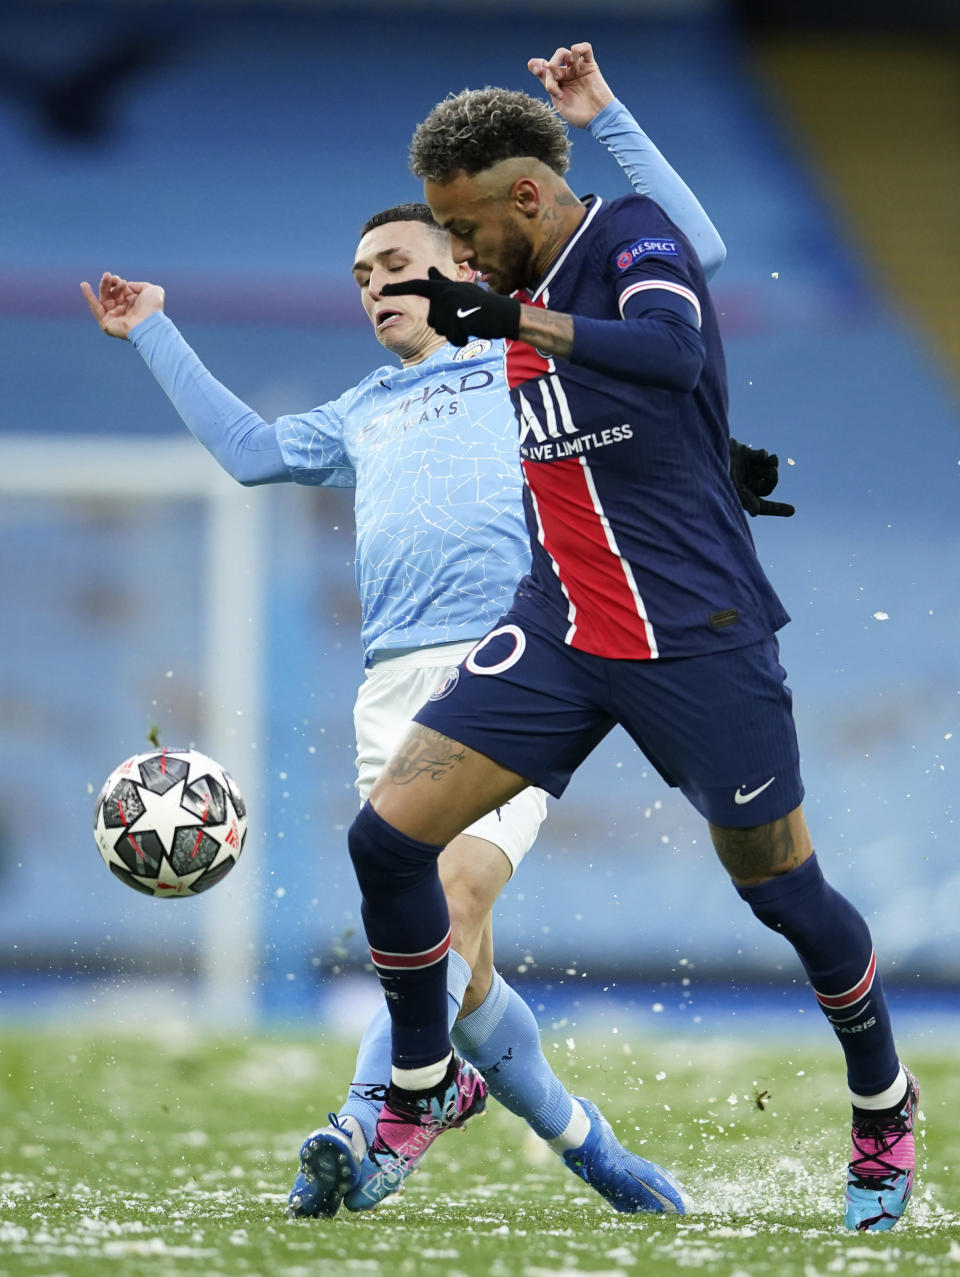 Manchester City's Phil Foden, left, challenges PSG's Neymar during the Champions League semifinal second leg soccer match between Manchester City and Paris Saint Germain at the Etihad stadium, in Manchester, Tuesday, May 4, 2021. (AP Photo/Dave Thompson)